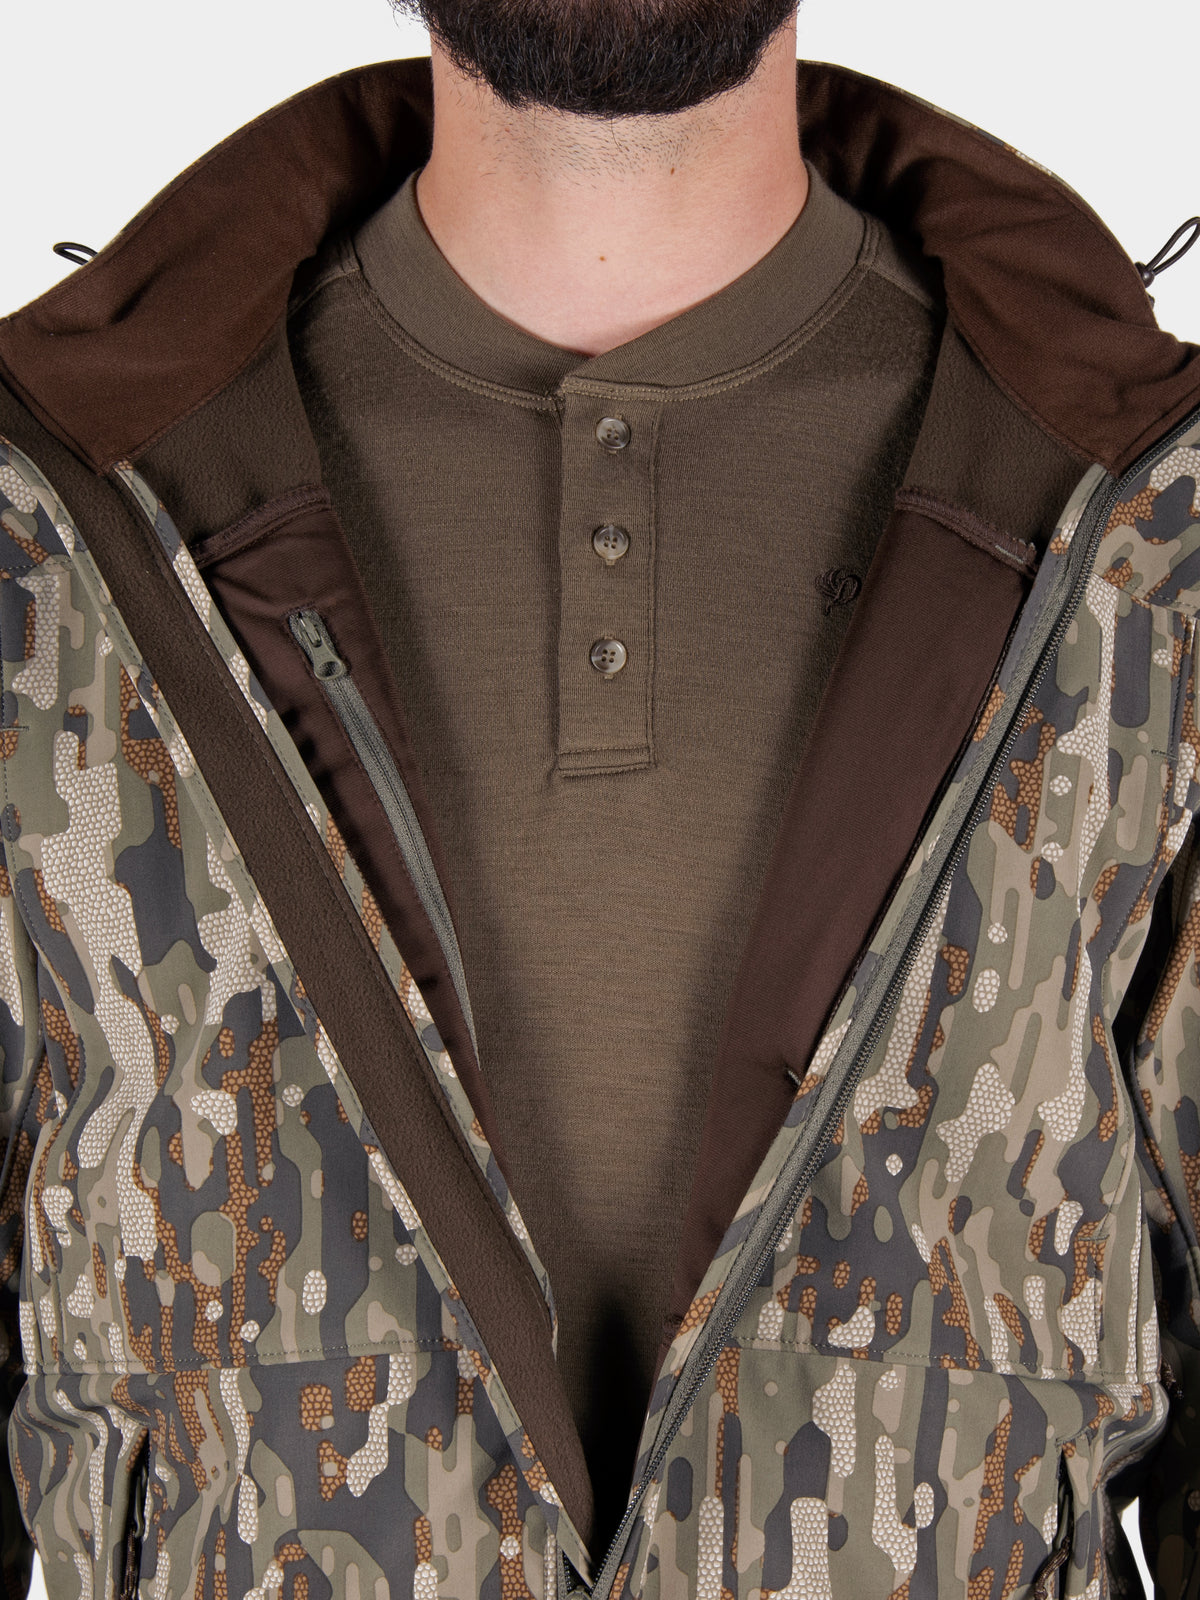 Contact Softshell Jacket - Woodland – Duck Camp